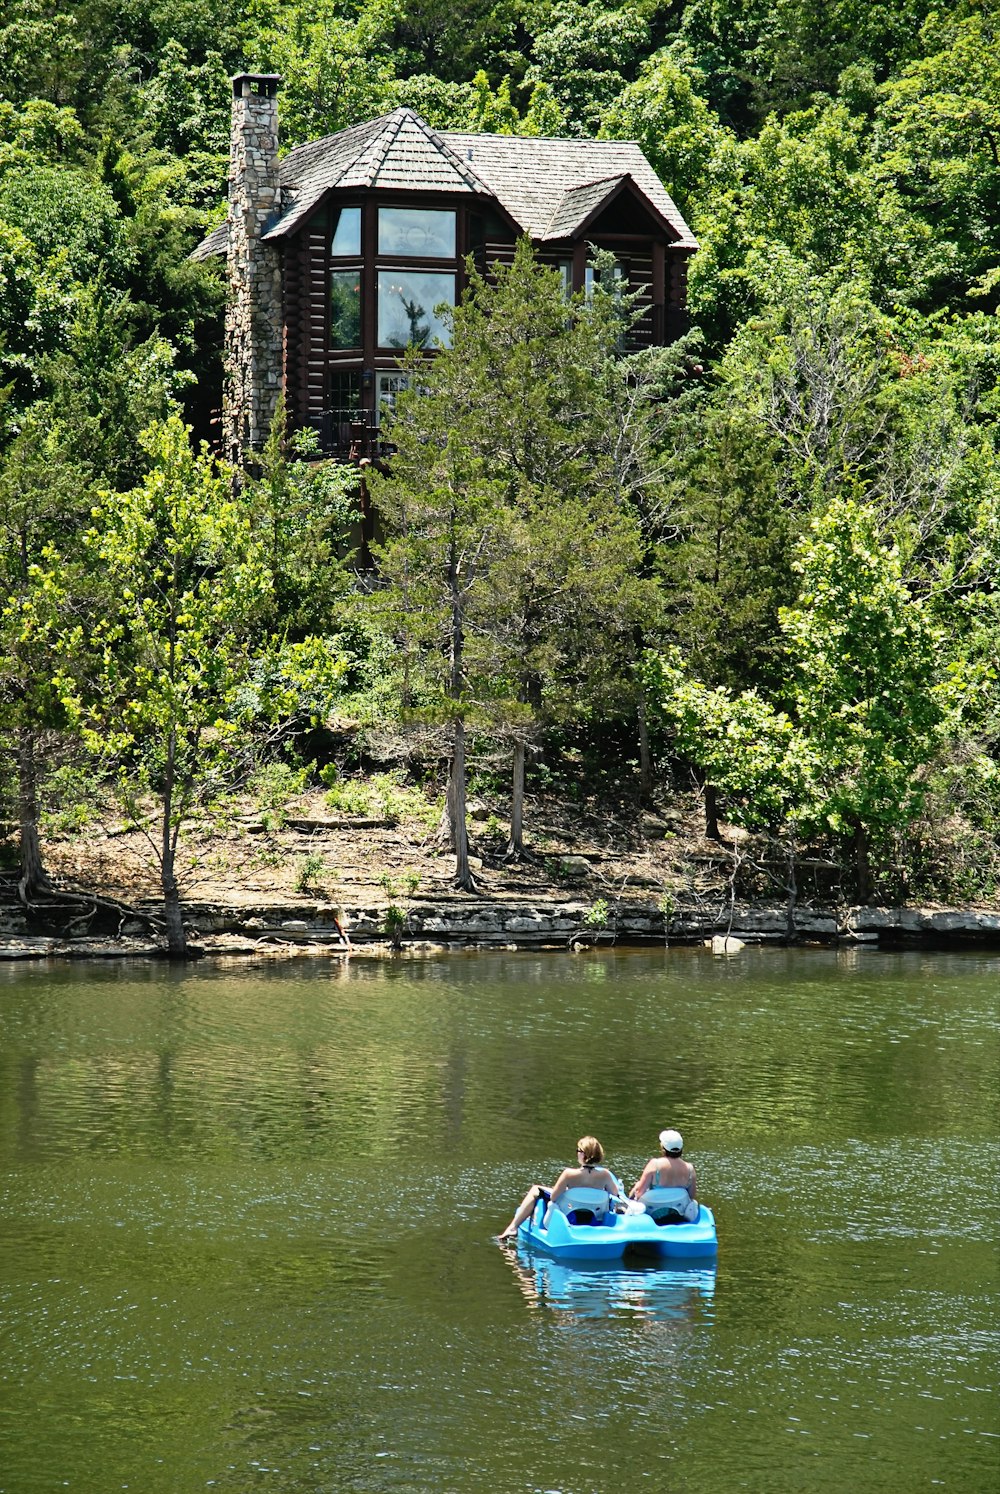 a couple of people in a small boat on a lake